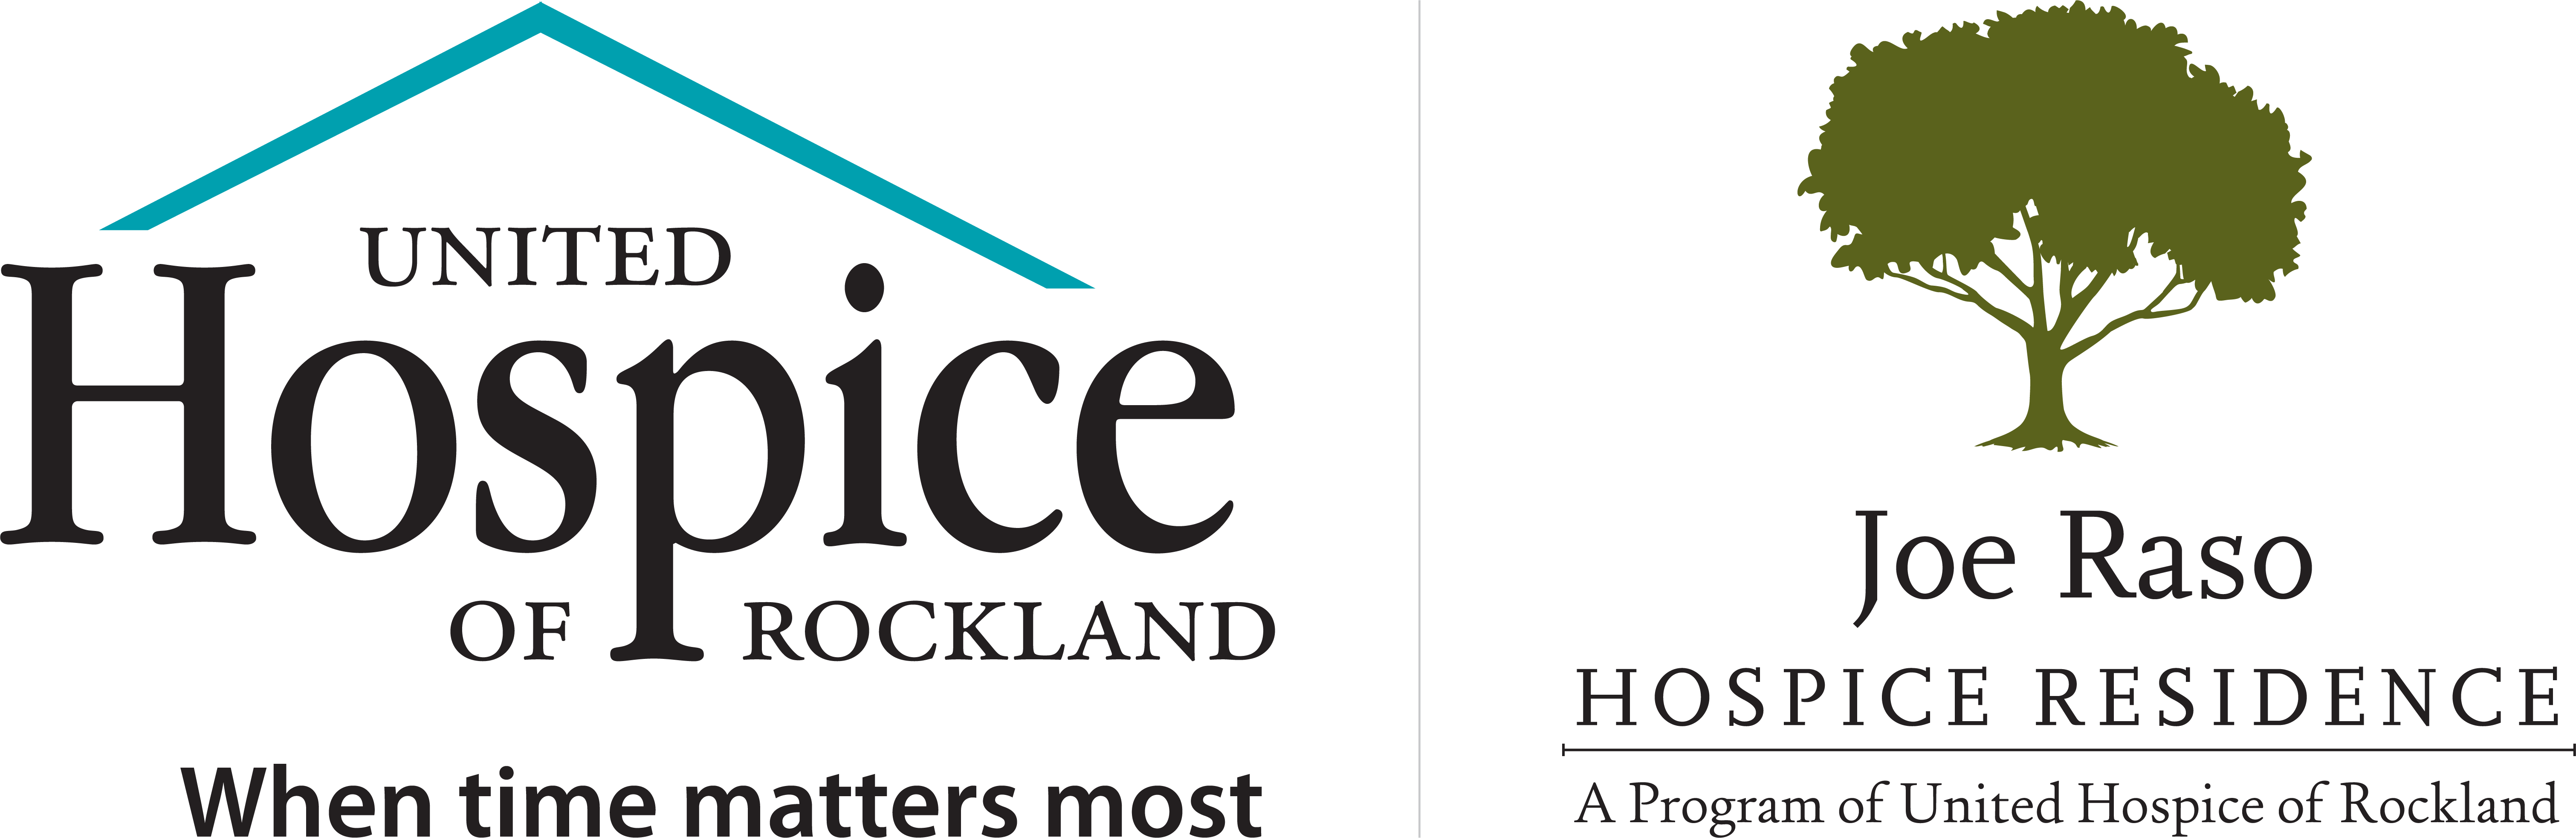 Hospice Logo - United Hospice of Rockland | When time matters most